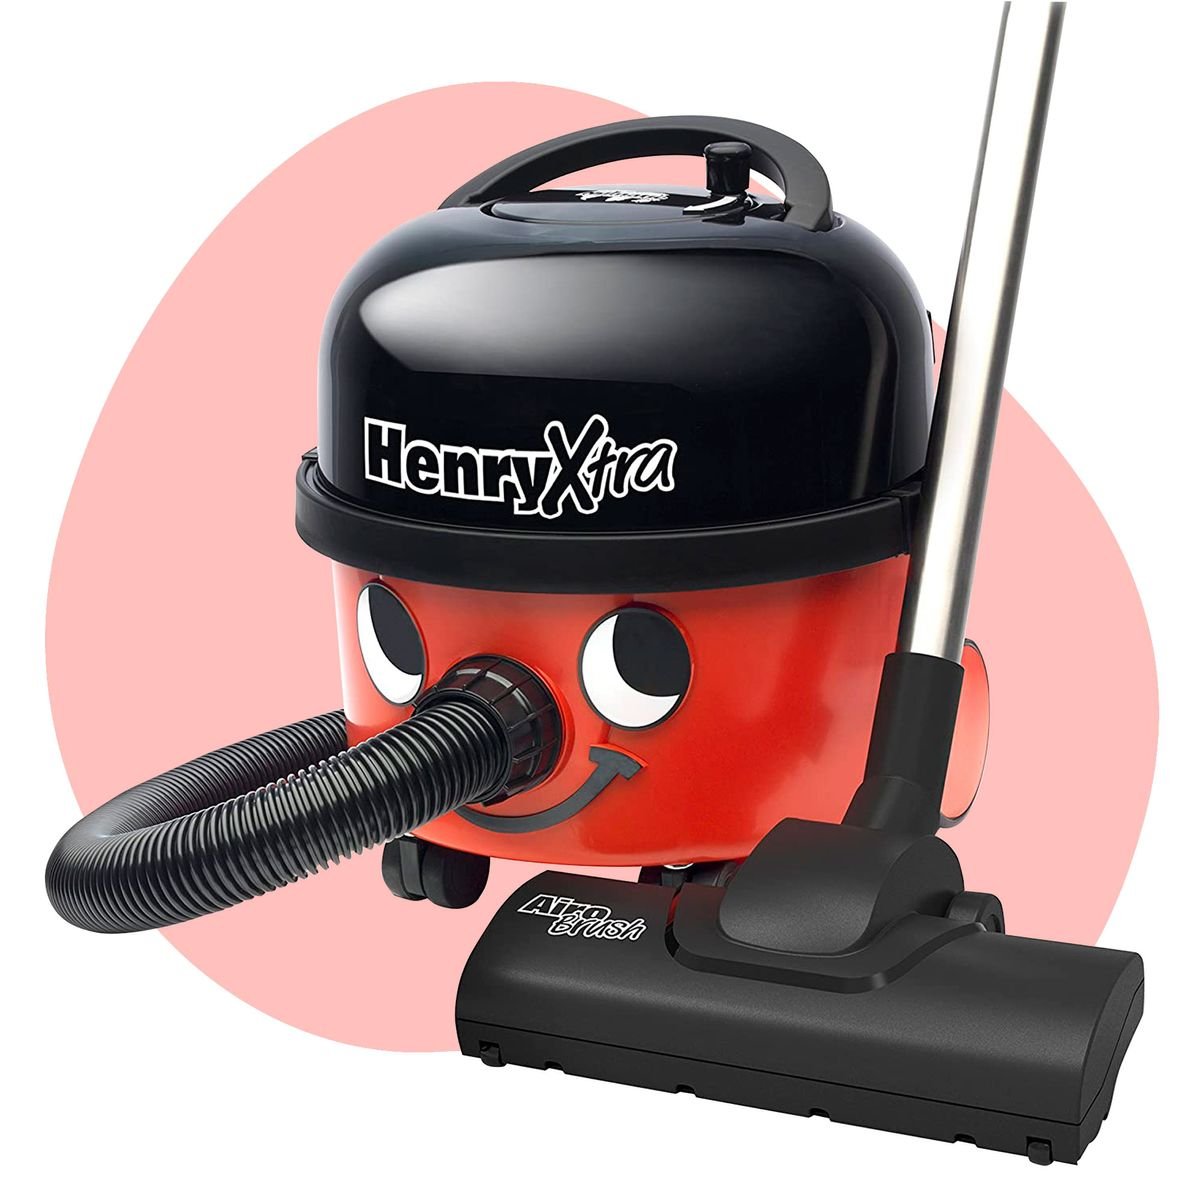 Best Henry vacuum- our favourite 6 Henry vacuums, tried and tested